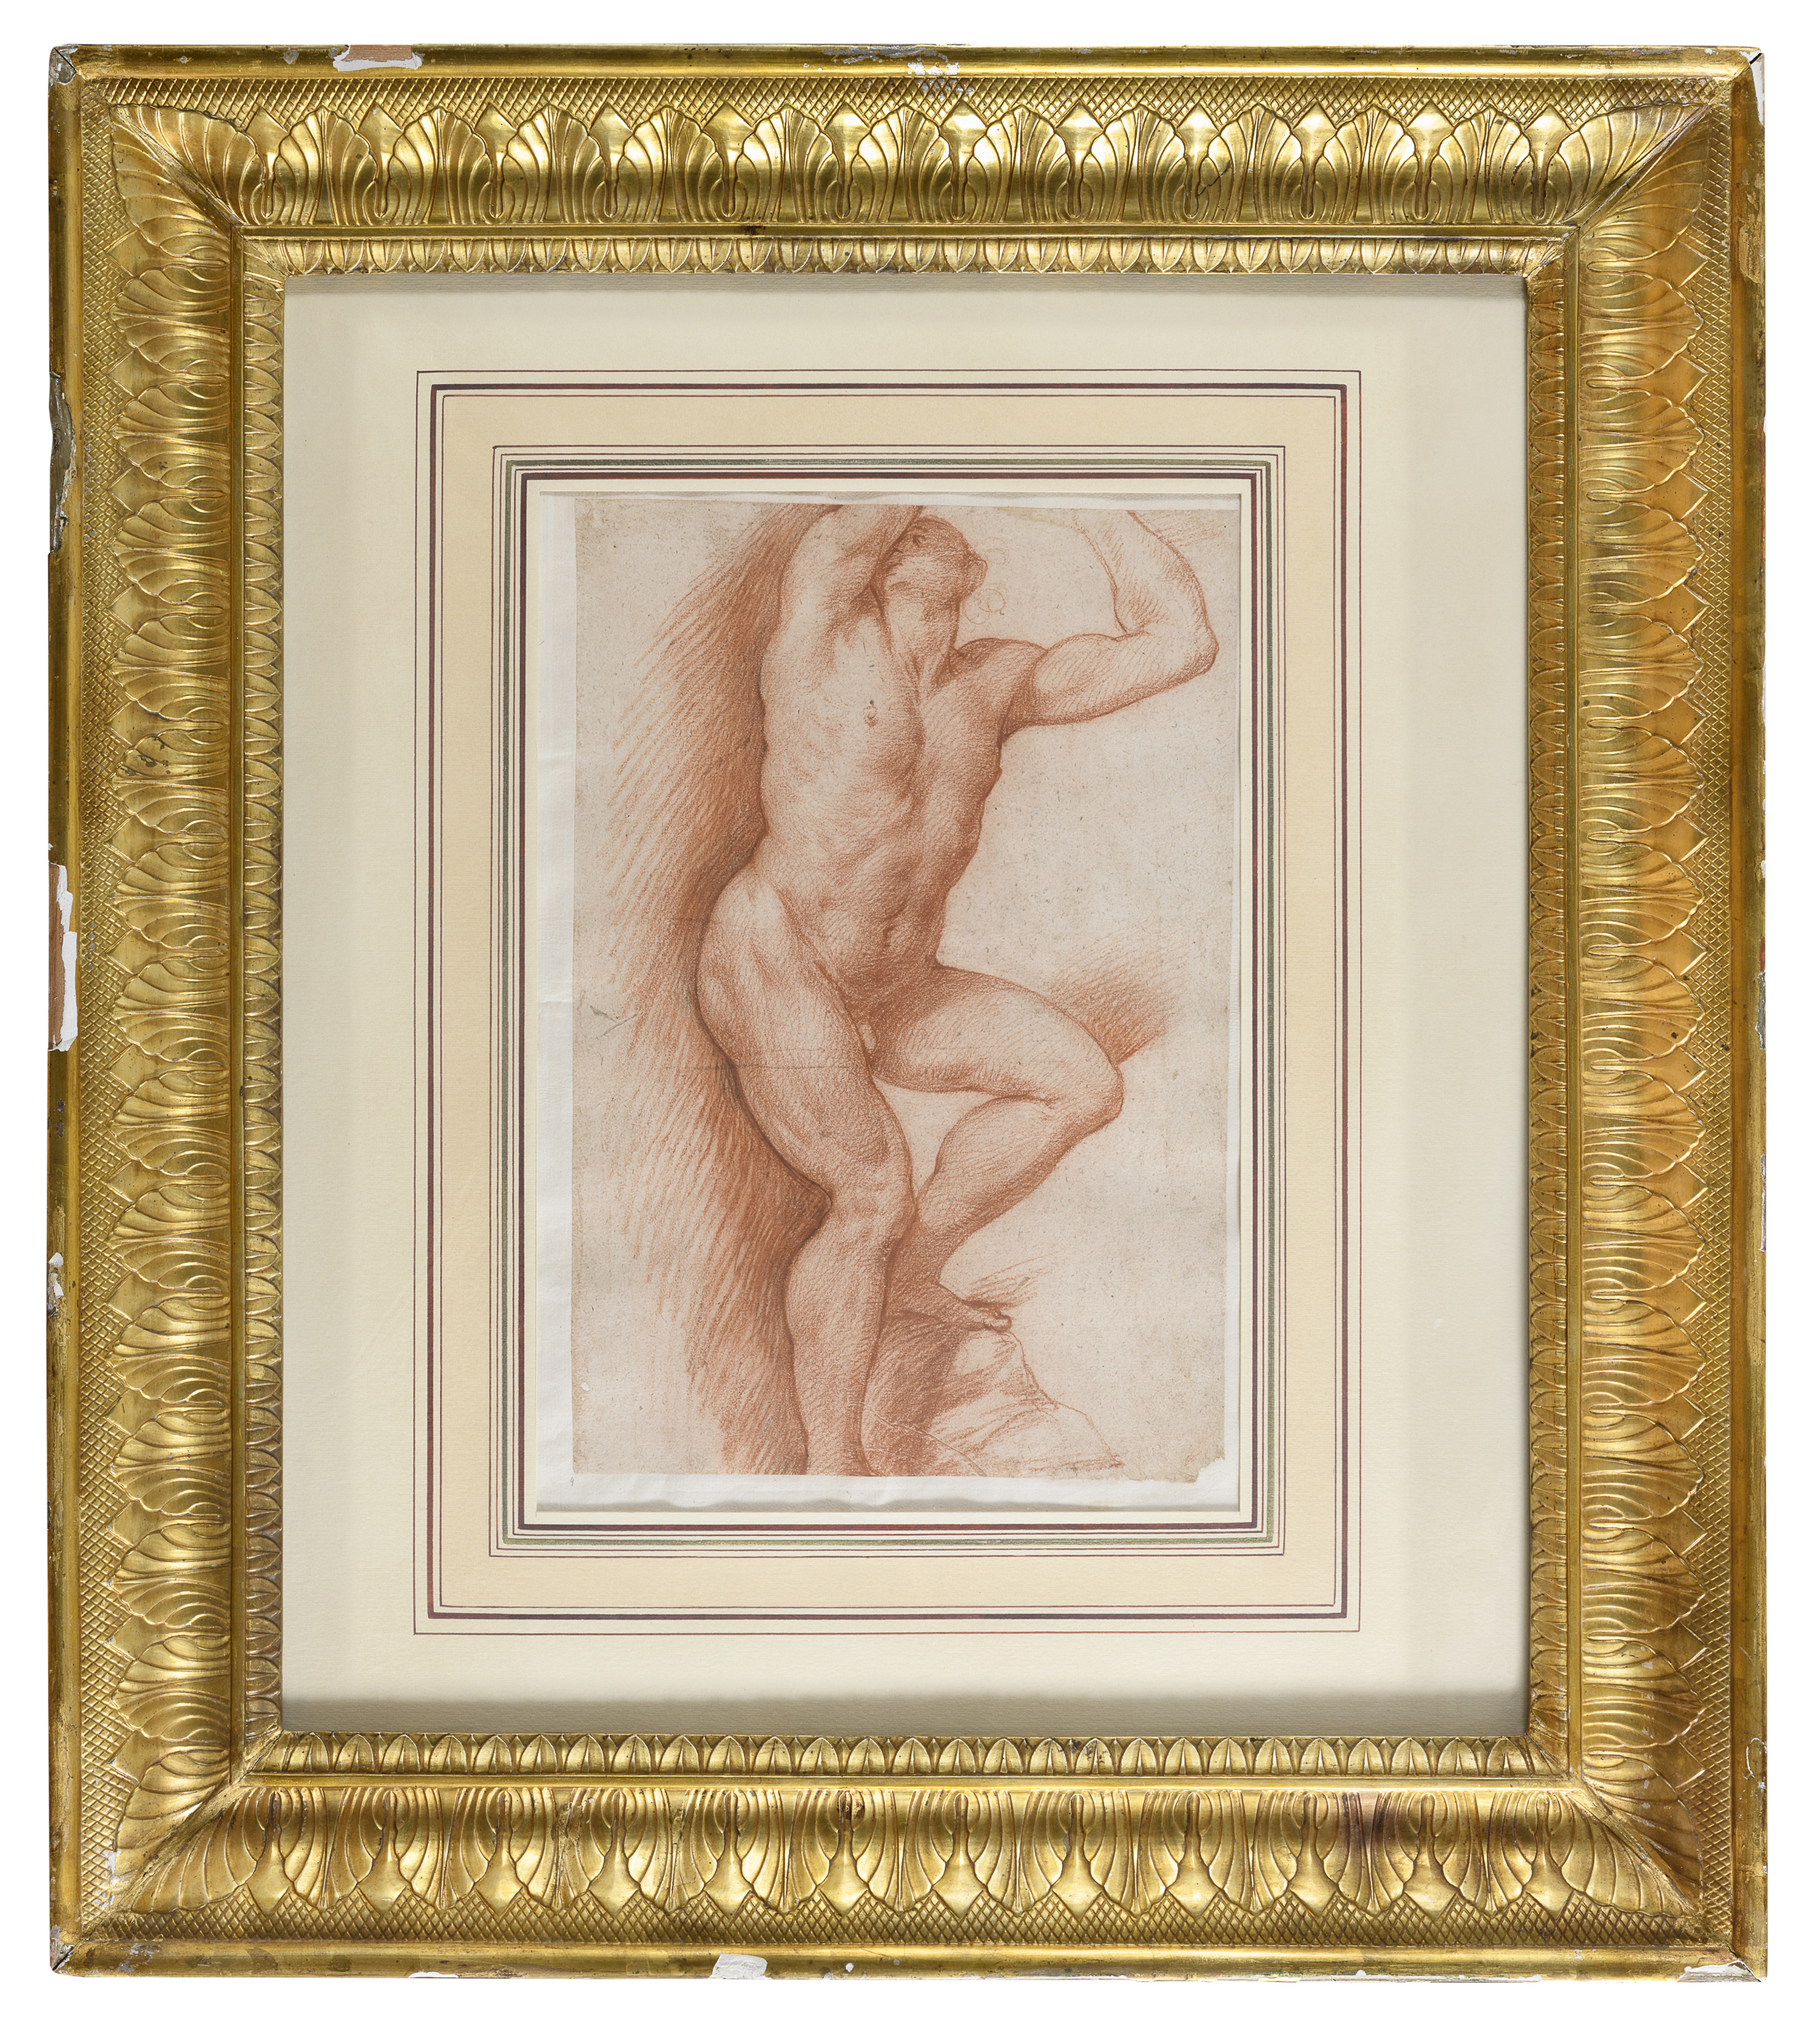 SANGUINE STUDY BY THE CIRCLE OF GIUSEPPE CESARI known as IL CAVALIER D'ARPINO - Image 2 of 2